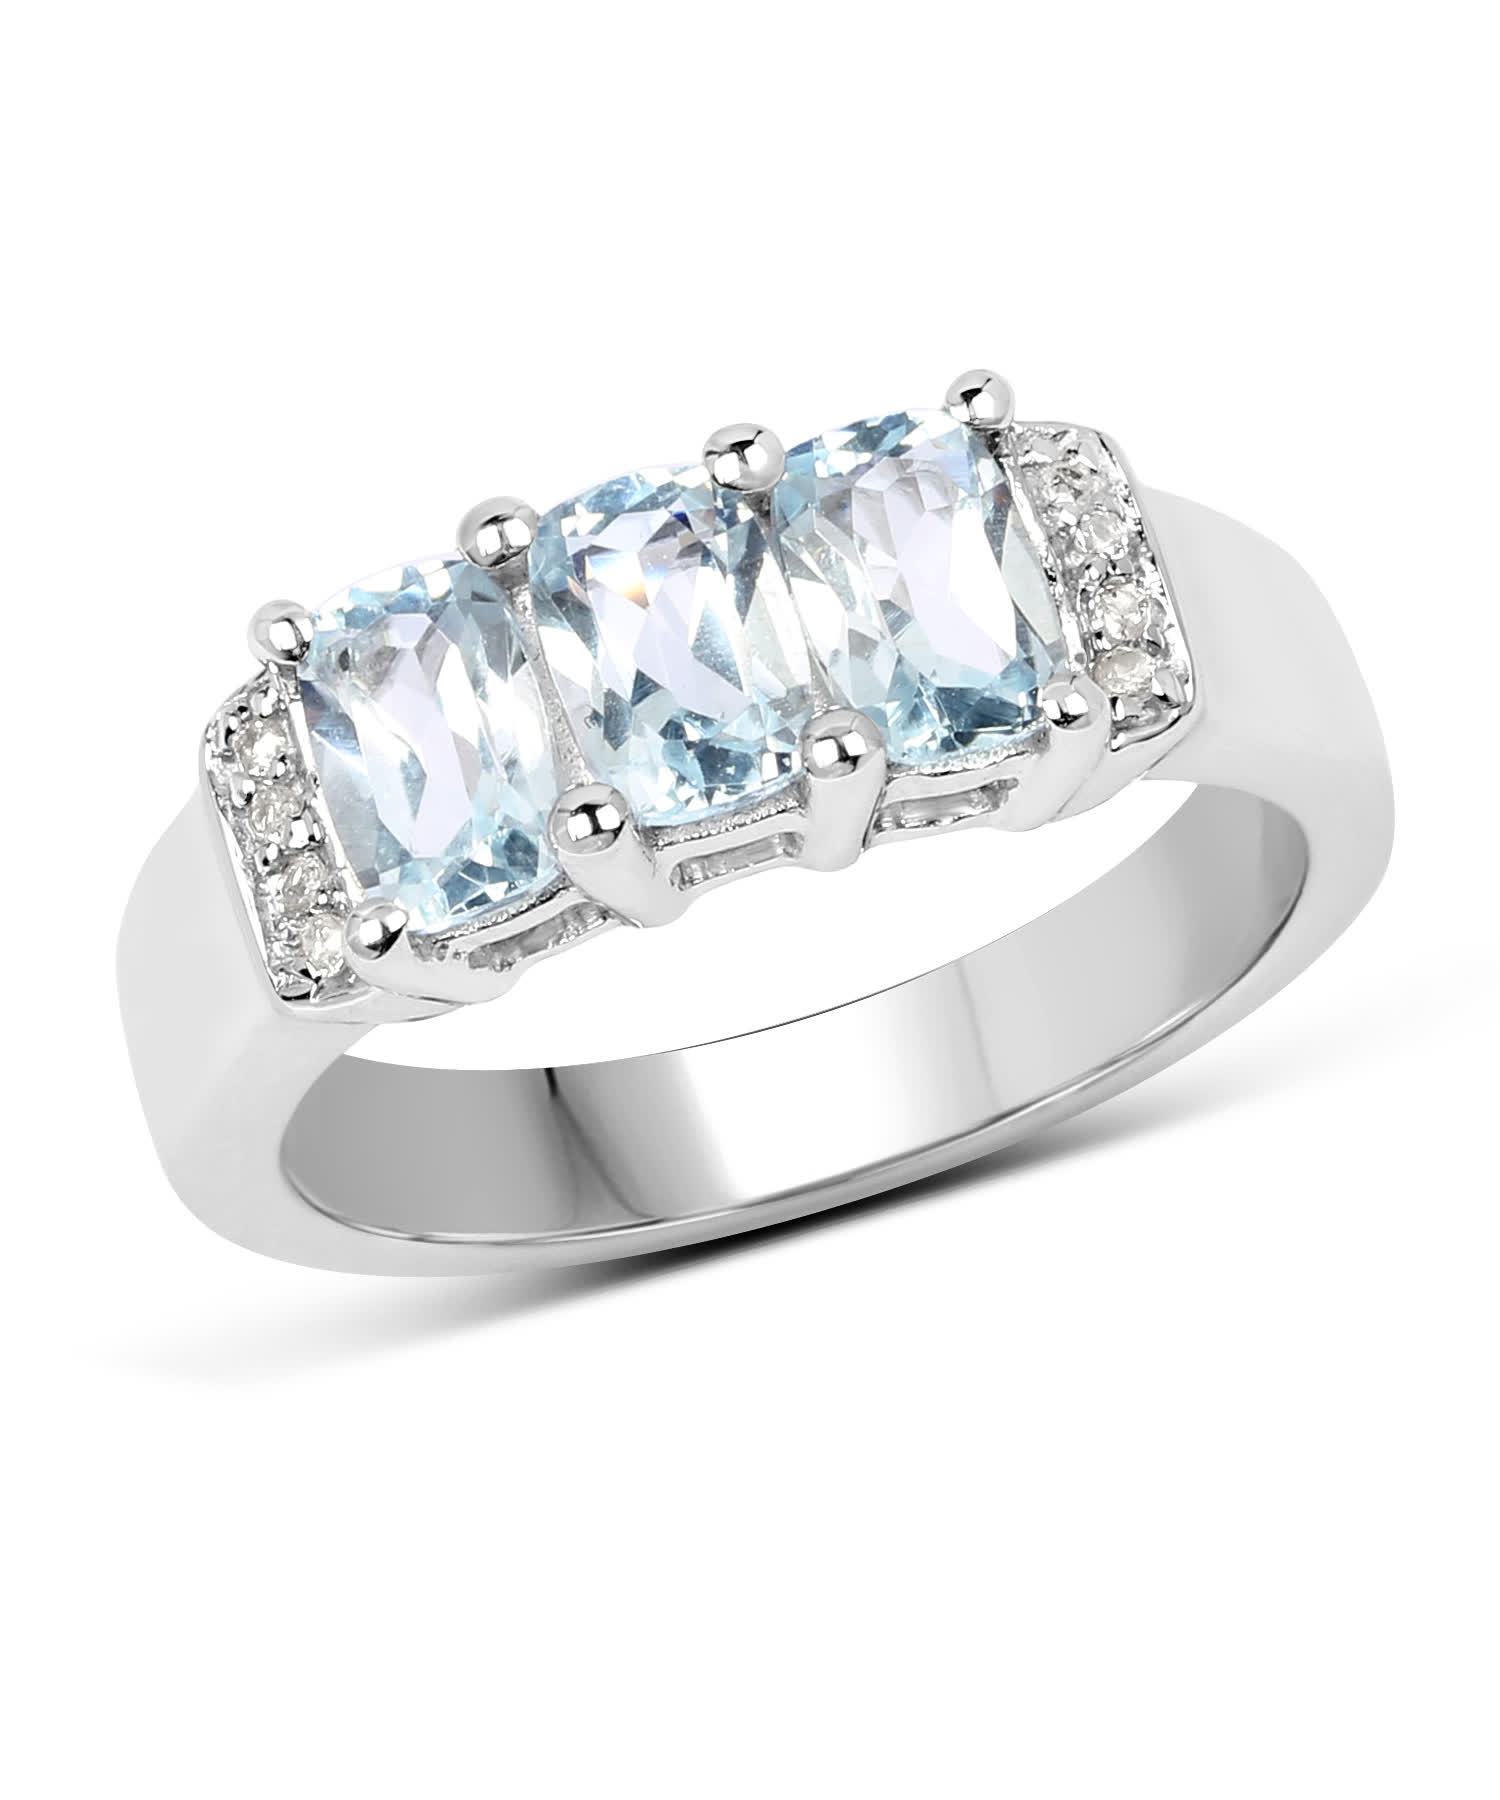 1.84ctw Natural Sky Blue Topaz Rhodium Plated 925 Sterling Silver Two-Stone Ring View 1